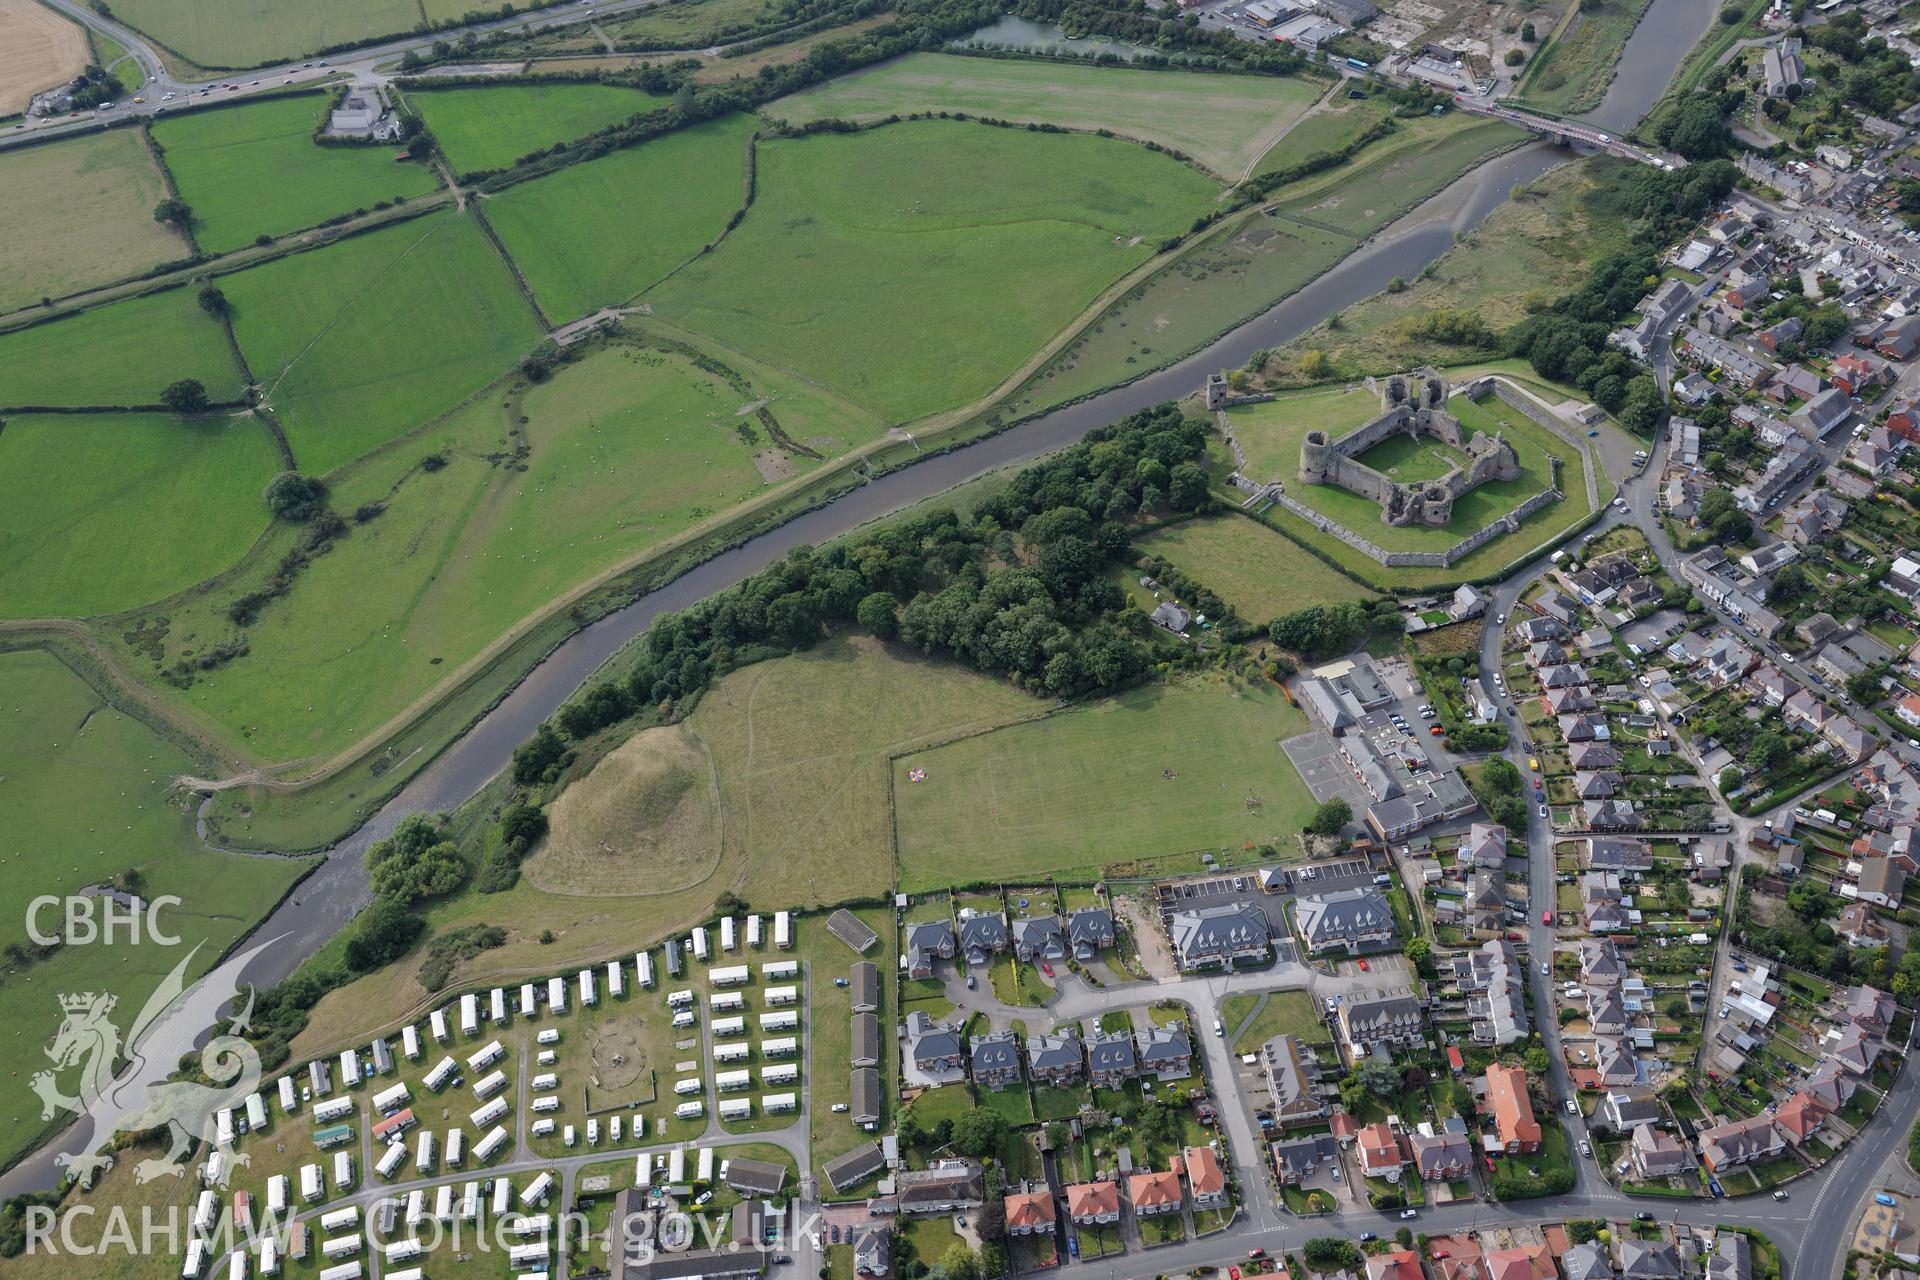 Twt Hill motte and bailey, Rhuddlan Castle and the town of Rhuddlan. Oblique aerial photograph taken during the Royal Commission's programme of archaeological aerial reconnaissance by Toby Driver on 11th September 2015.